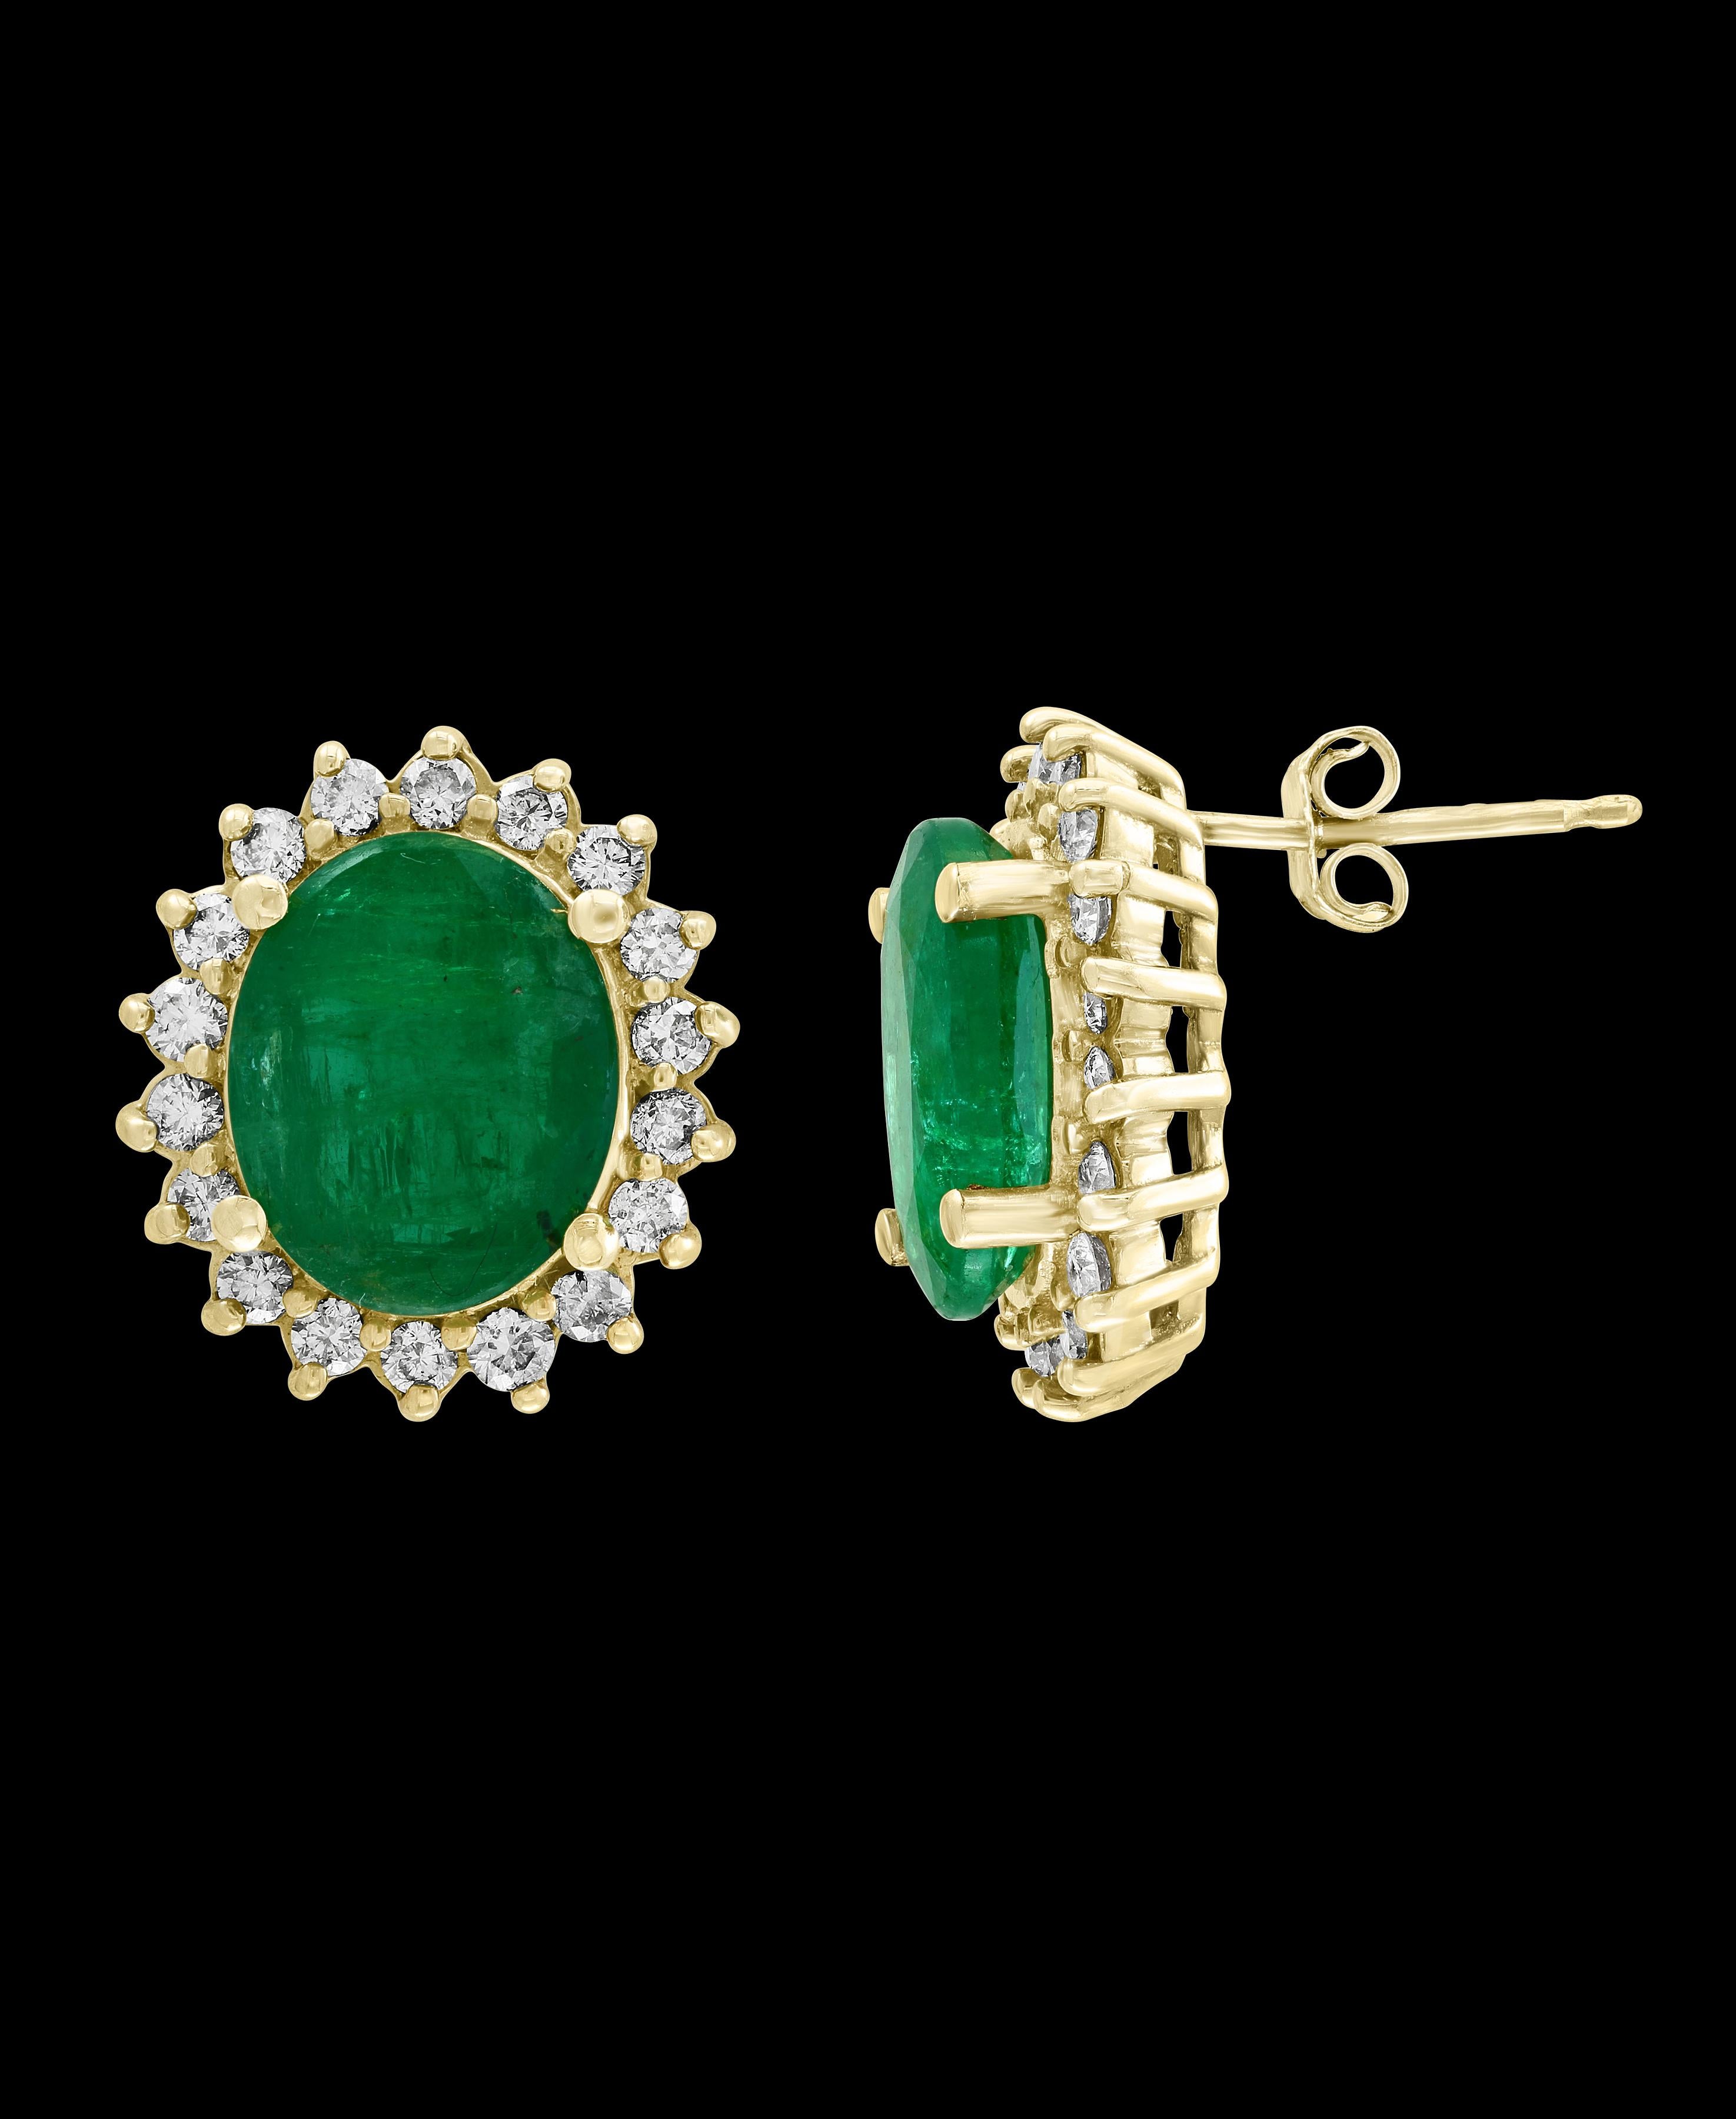 8 Carat Oval Emerald  Diamond Stud Earrings  14 Karat Gold Brand New
This exquisite pair of earrings are beautifully crafted with 14 karat yellow gold  weighing 16.3 grams
Two fine Emerald weighing approximately 8  carats are surrounded by 